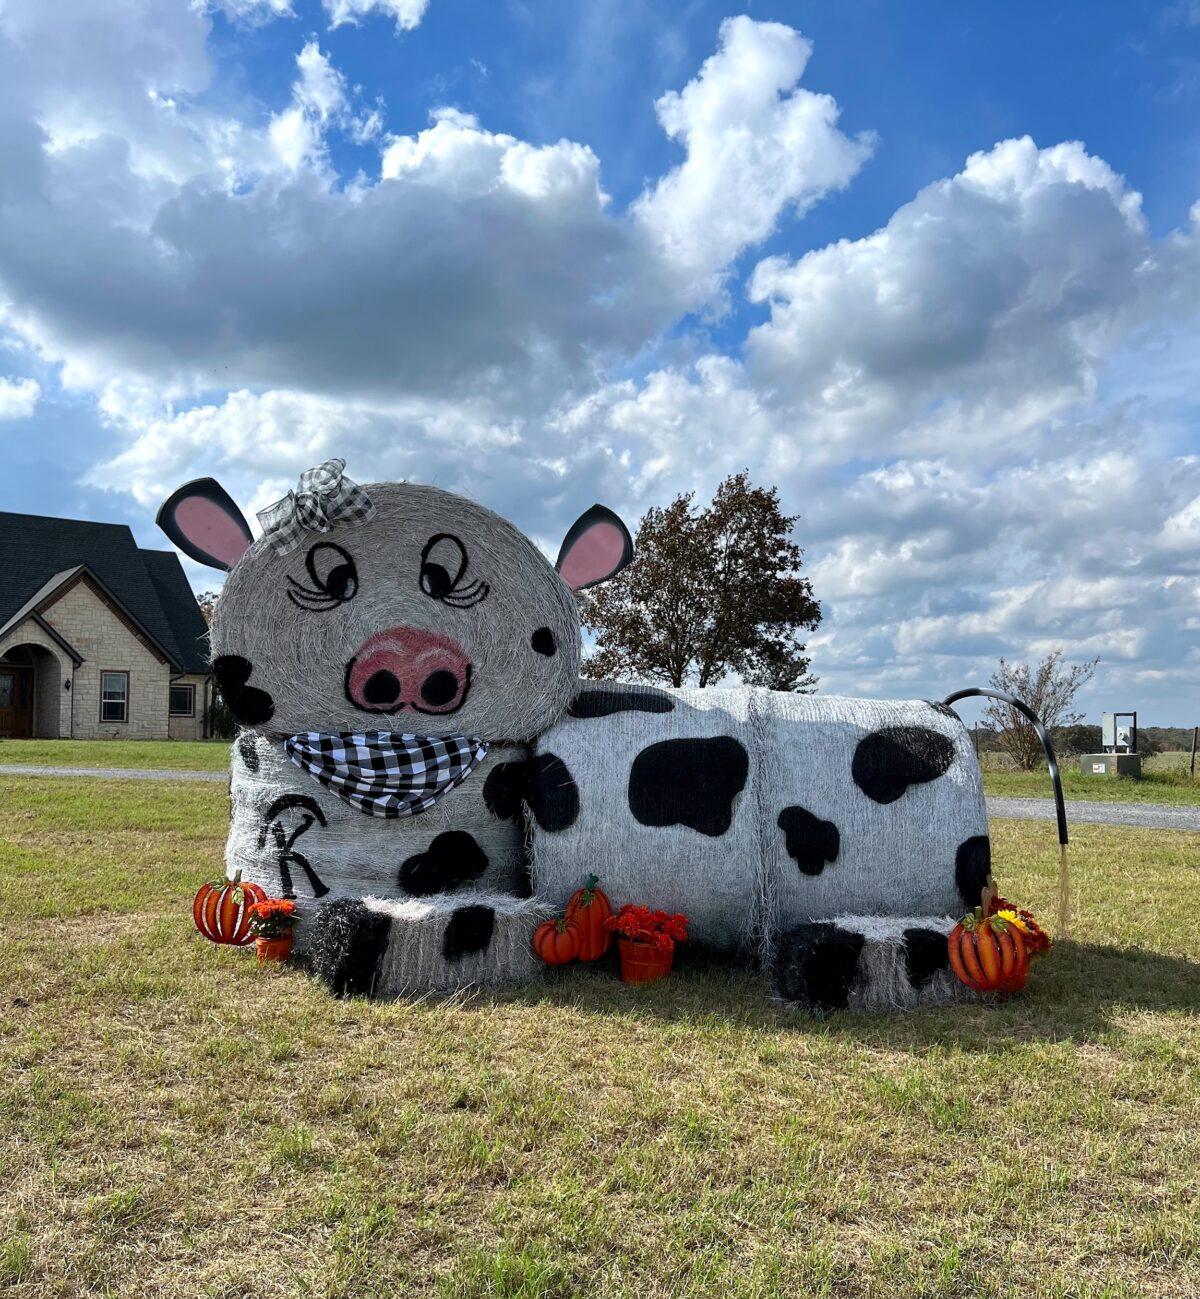 A hay bale sculpture of a cow. (Courtesy of <a href="https://www.facebook.com/groups/320200669469831/">Melissa Kelley</a>)